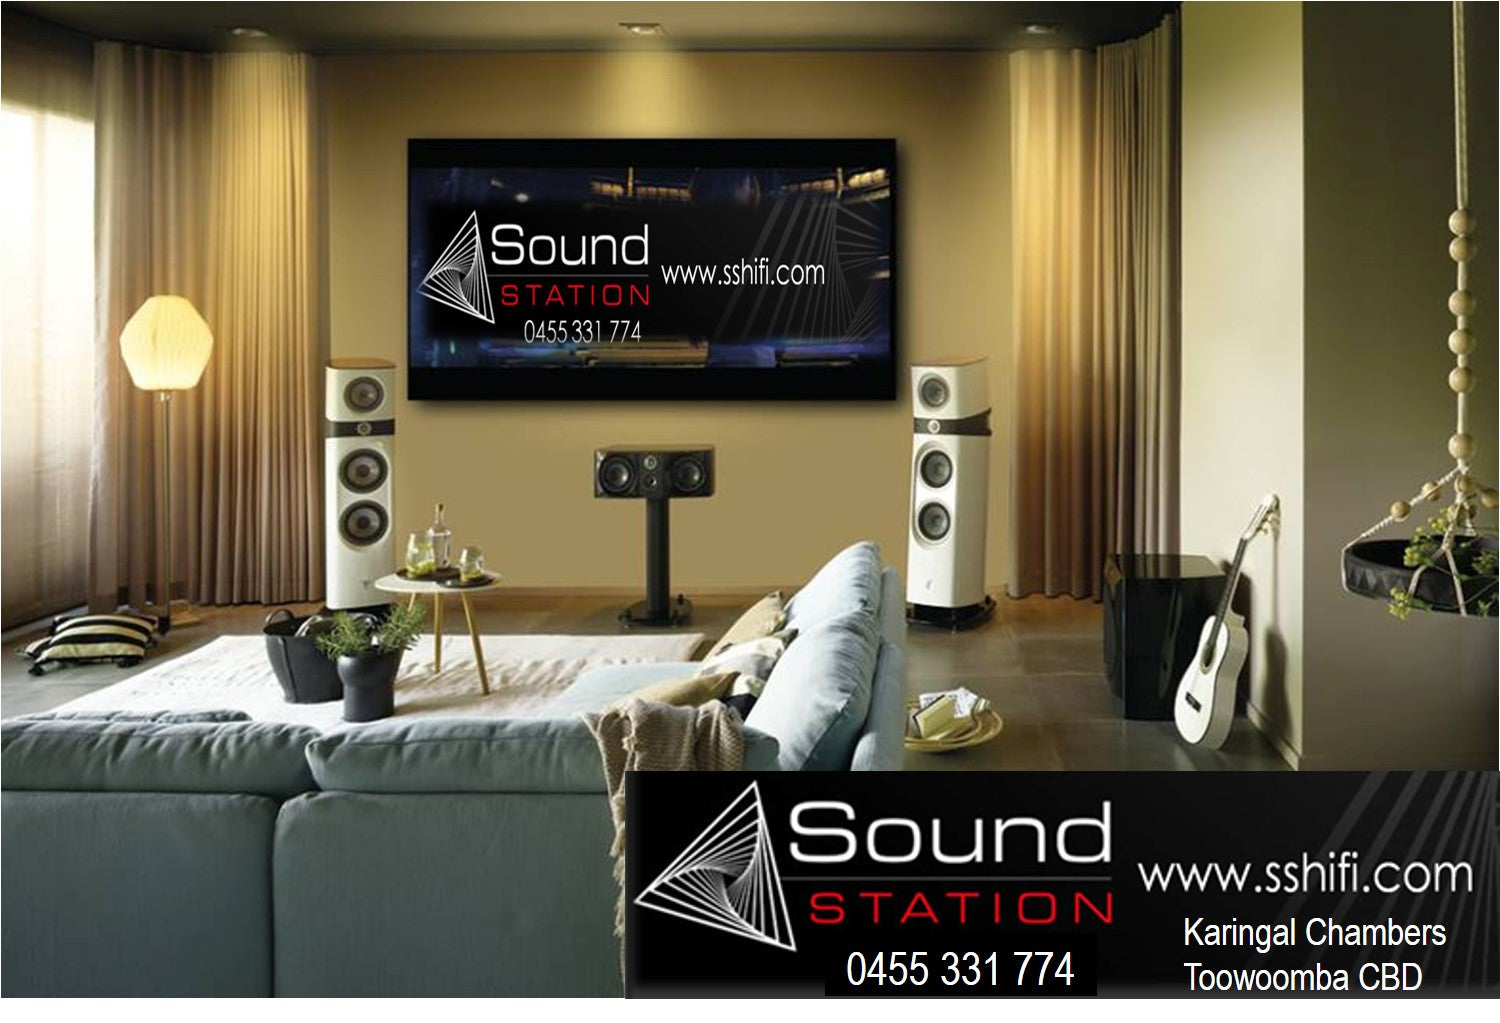 Load video: Sound and visual example of Sound stations offerings